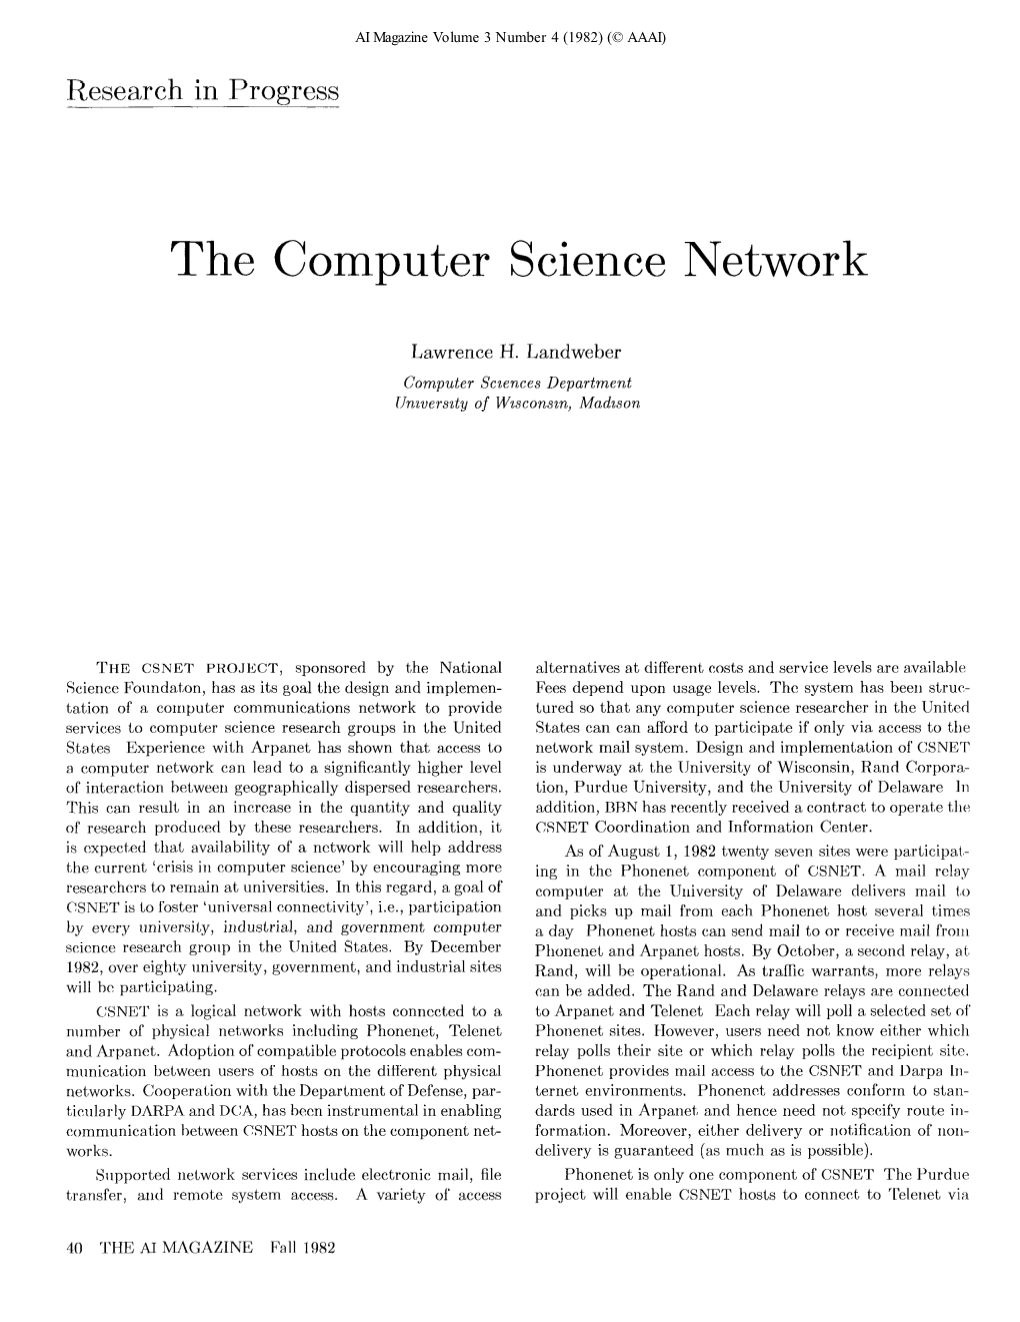 The Computer Science Network